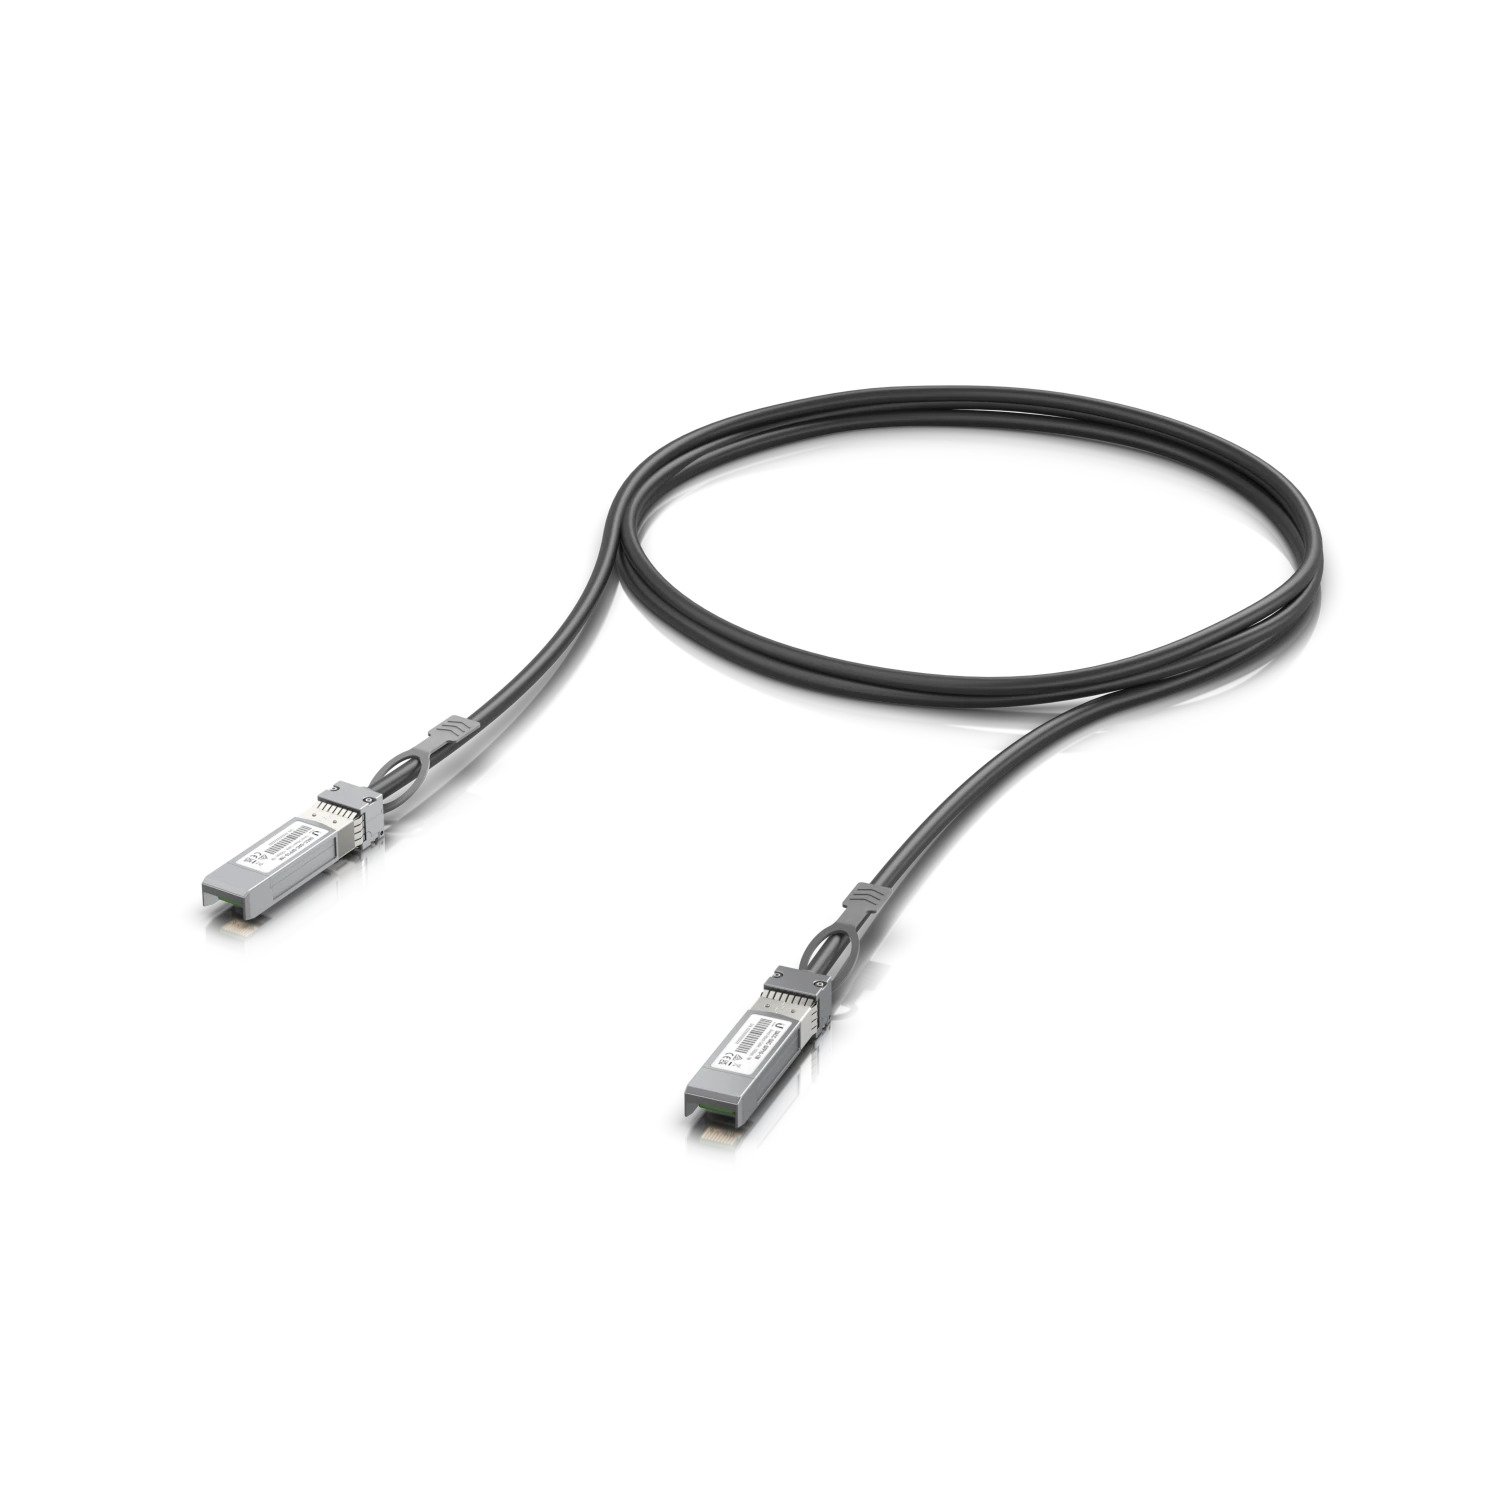 UDAC Cable, SFP+, 10Gbps, 1m